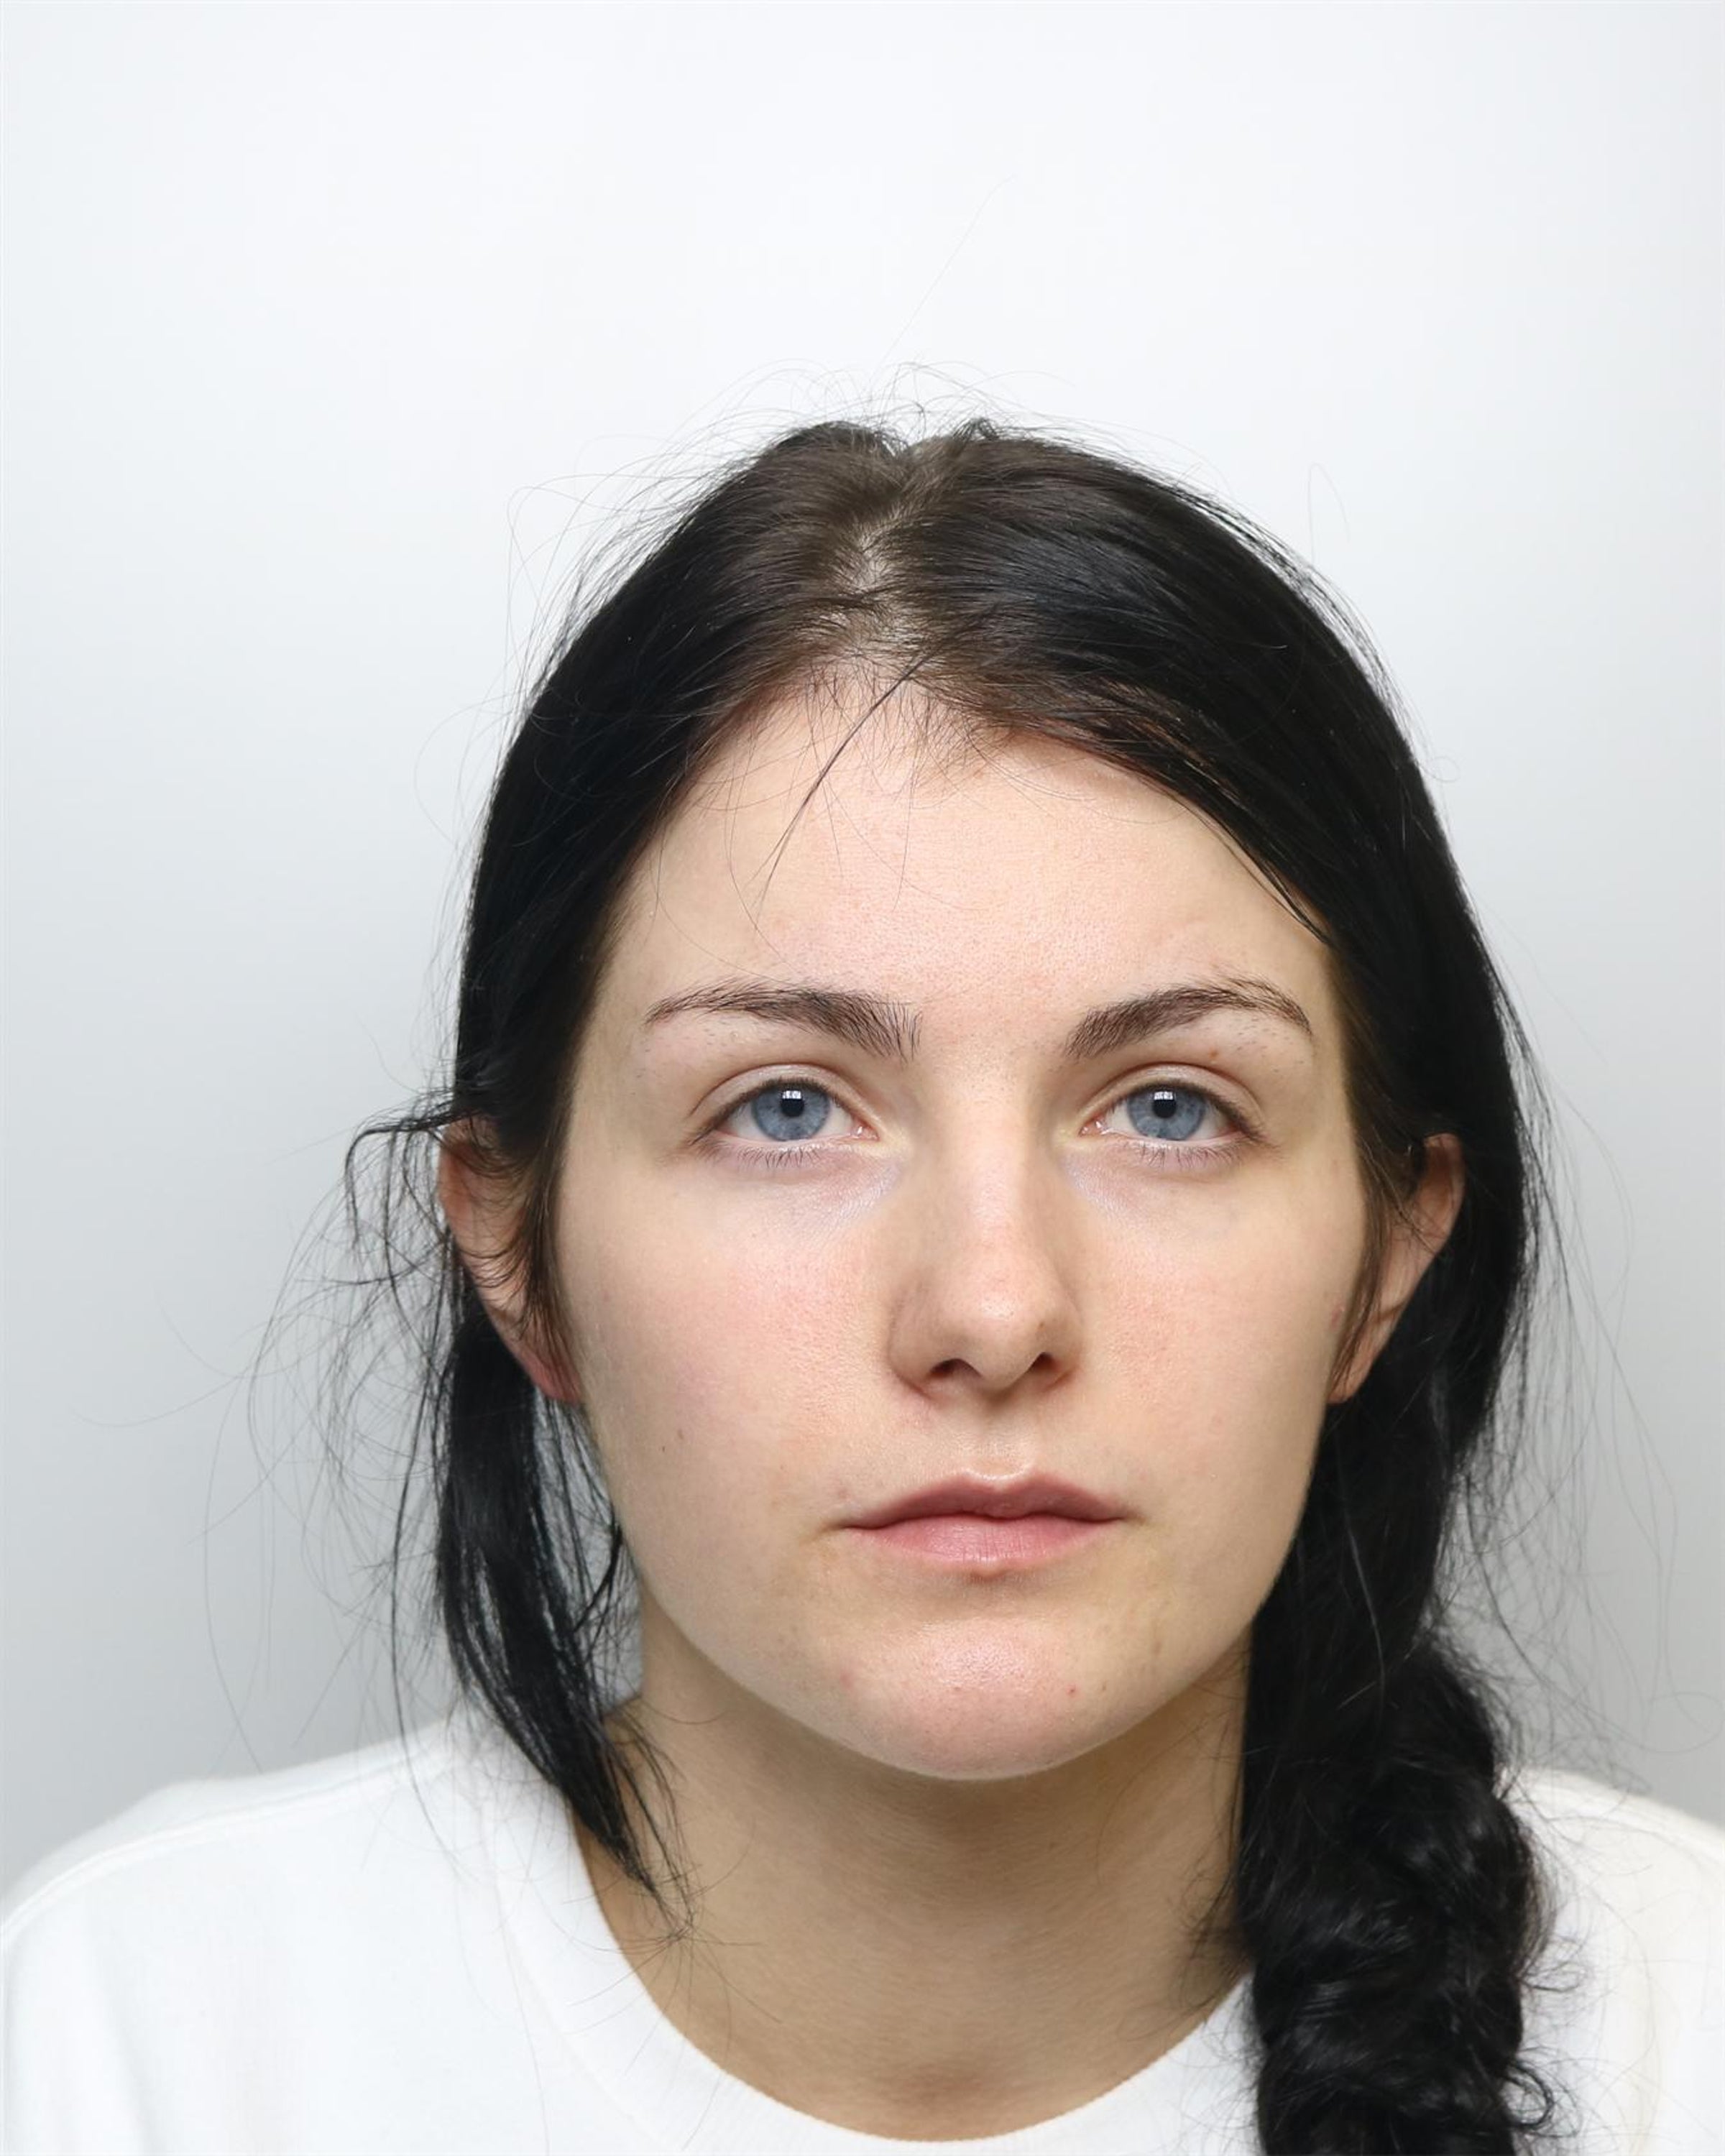 Frankie Smith was jailed for eight years at Bradford Crown Court for causing or allowing the death of her 16-month-old daughter, Star Hobson. (West Yorkshire Police/PA)